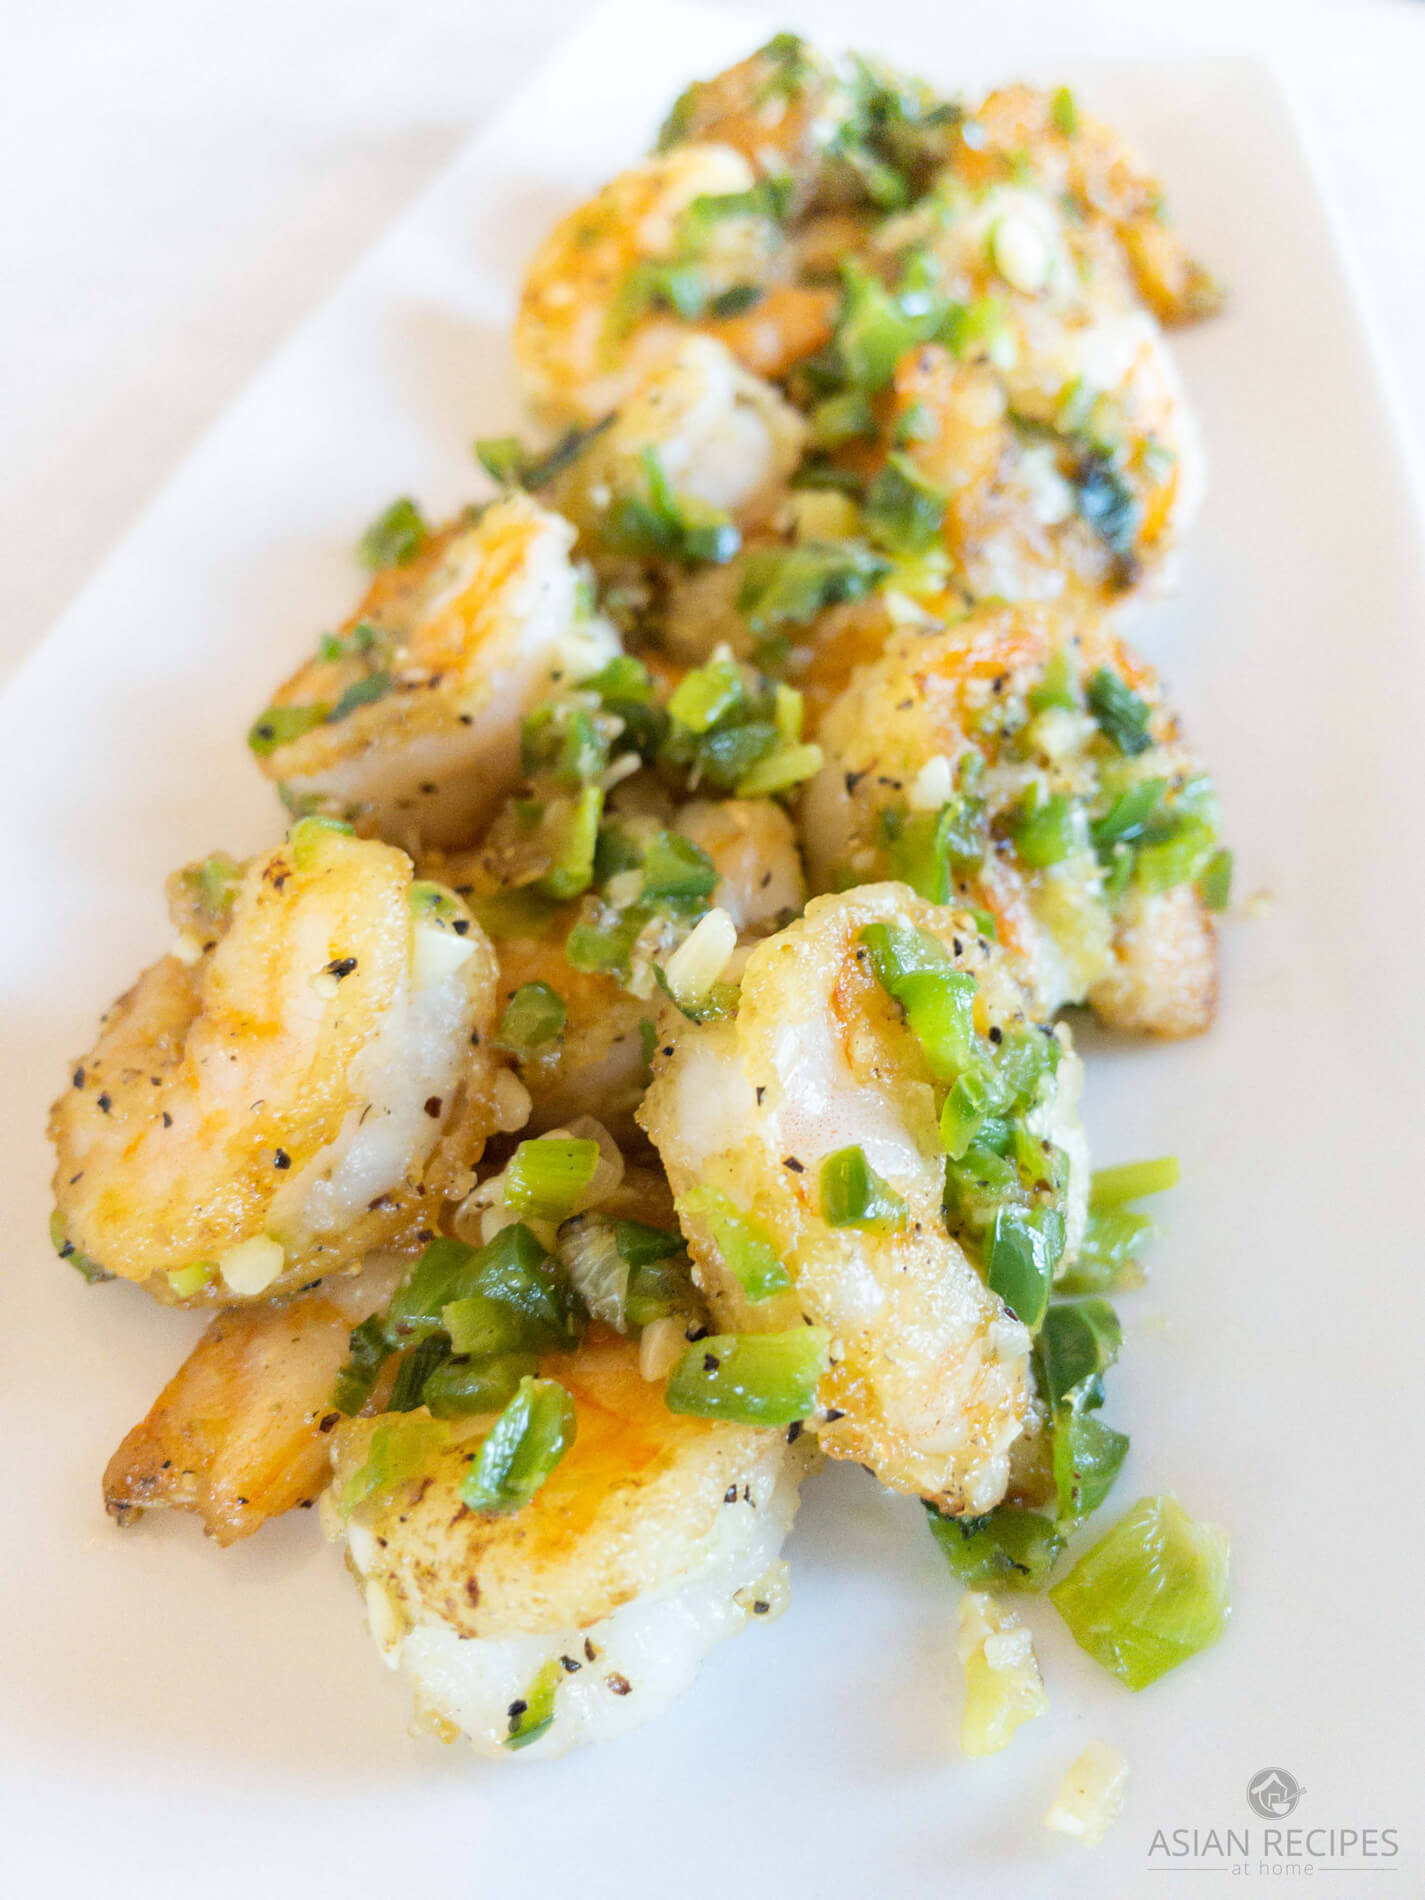 Shrimp are fried in avocado oil to a golden brown and tossed with peppers, garlic, green onion, salt, and pepper.